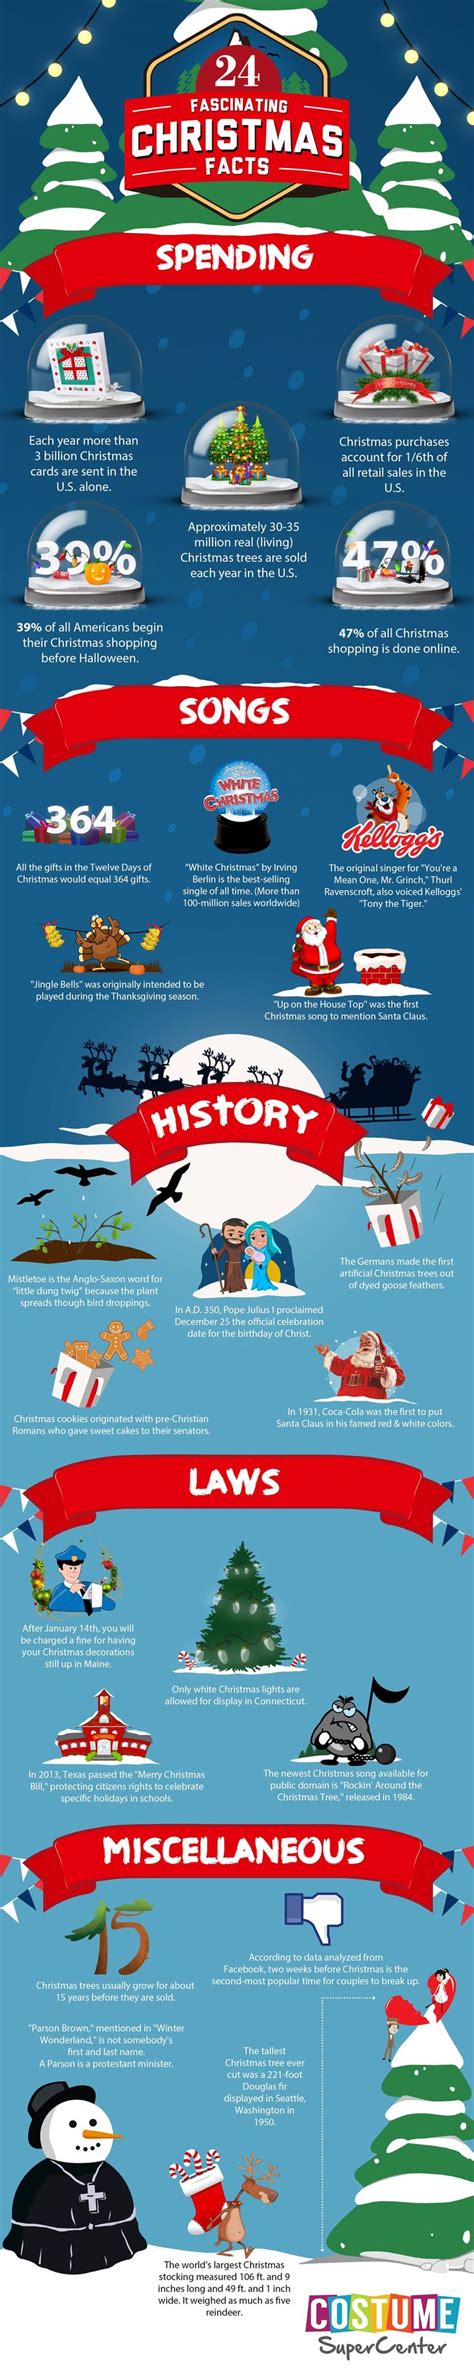 fascinating christmas facts infographic christmas trivia christmas fun facts christmas